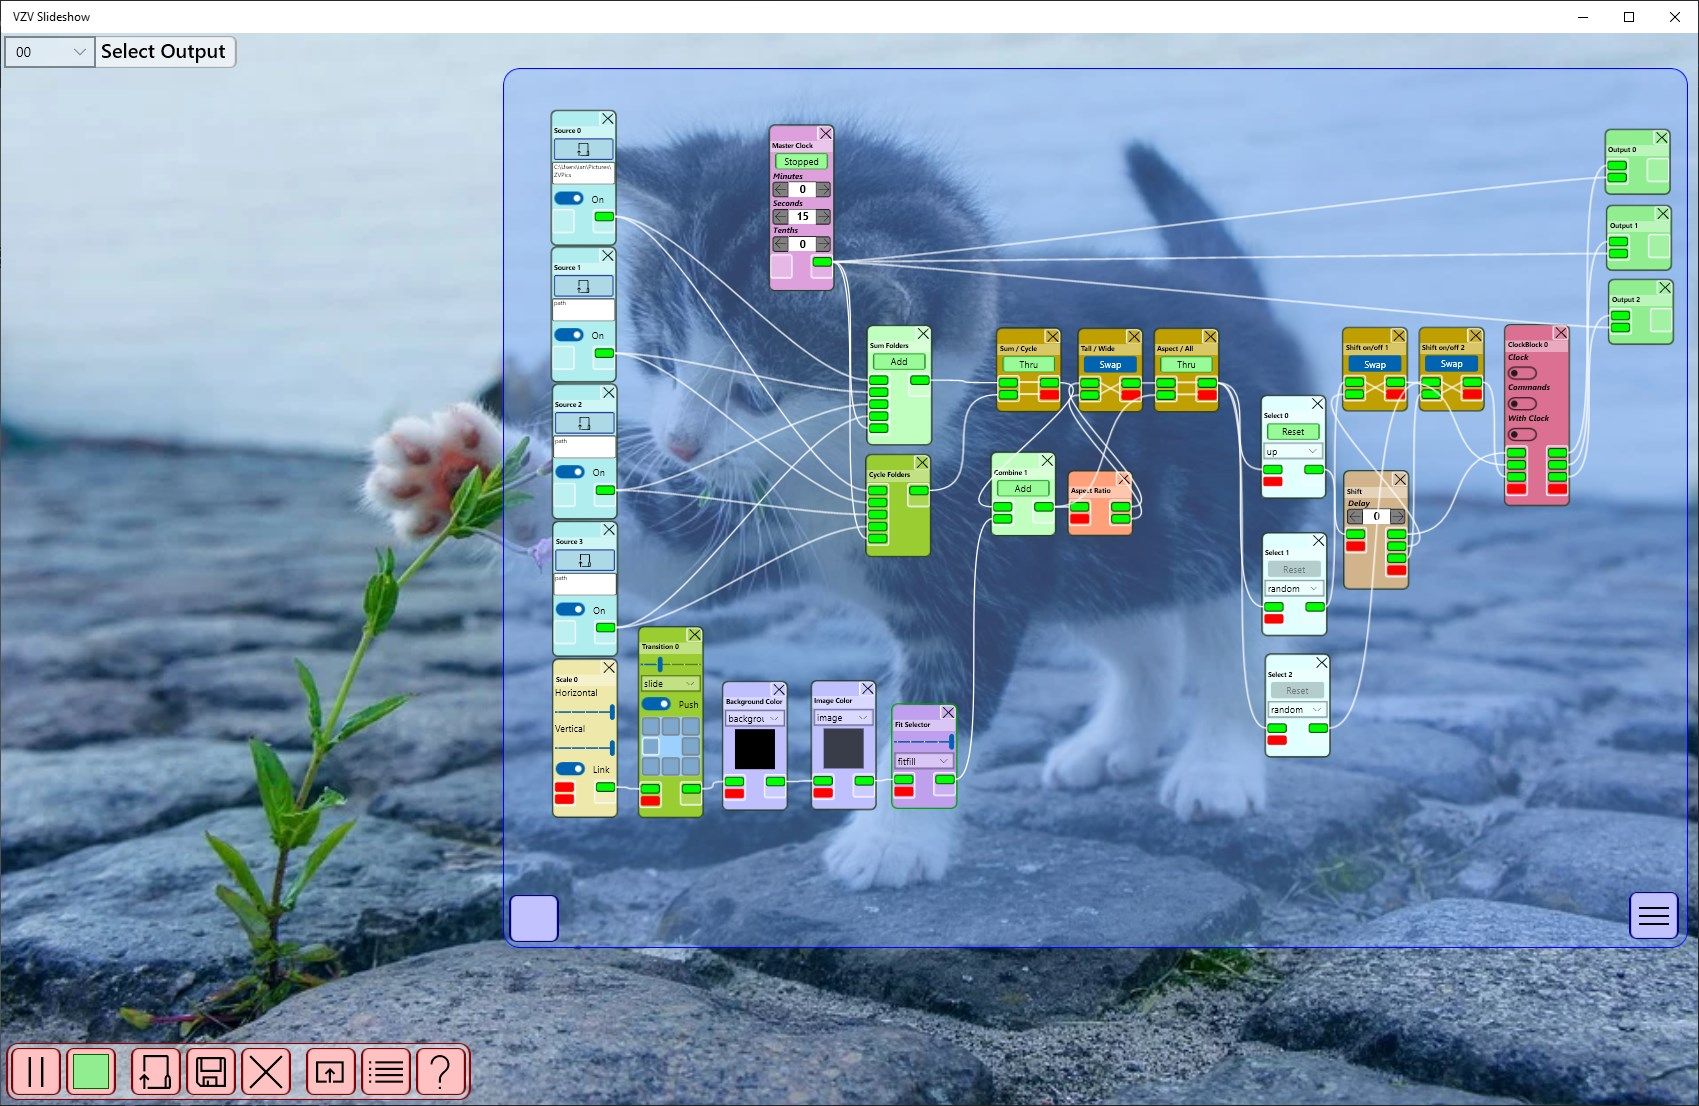 VZV Slideshow can also be used for displaying kittens.